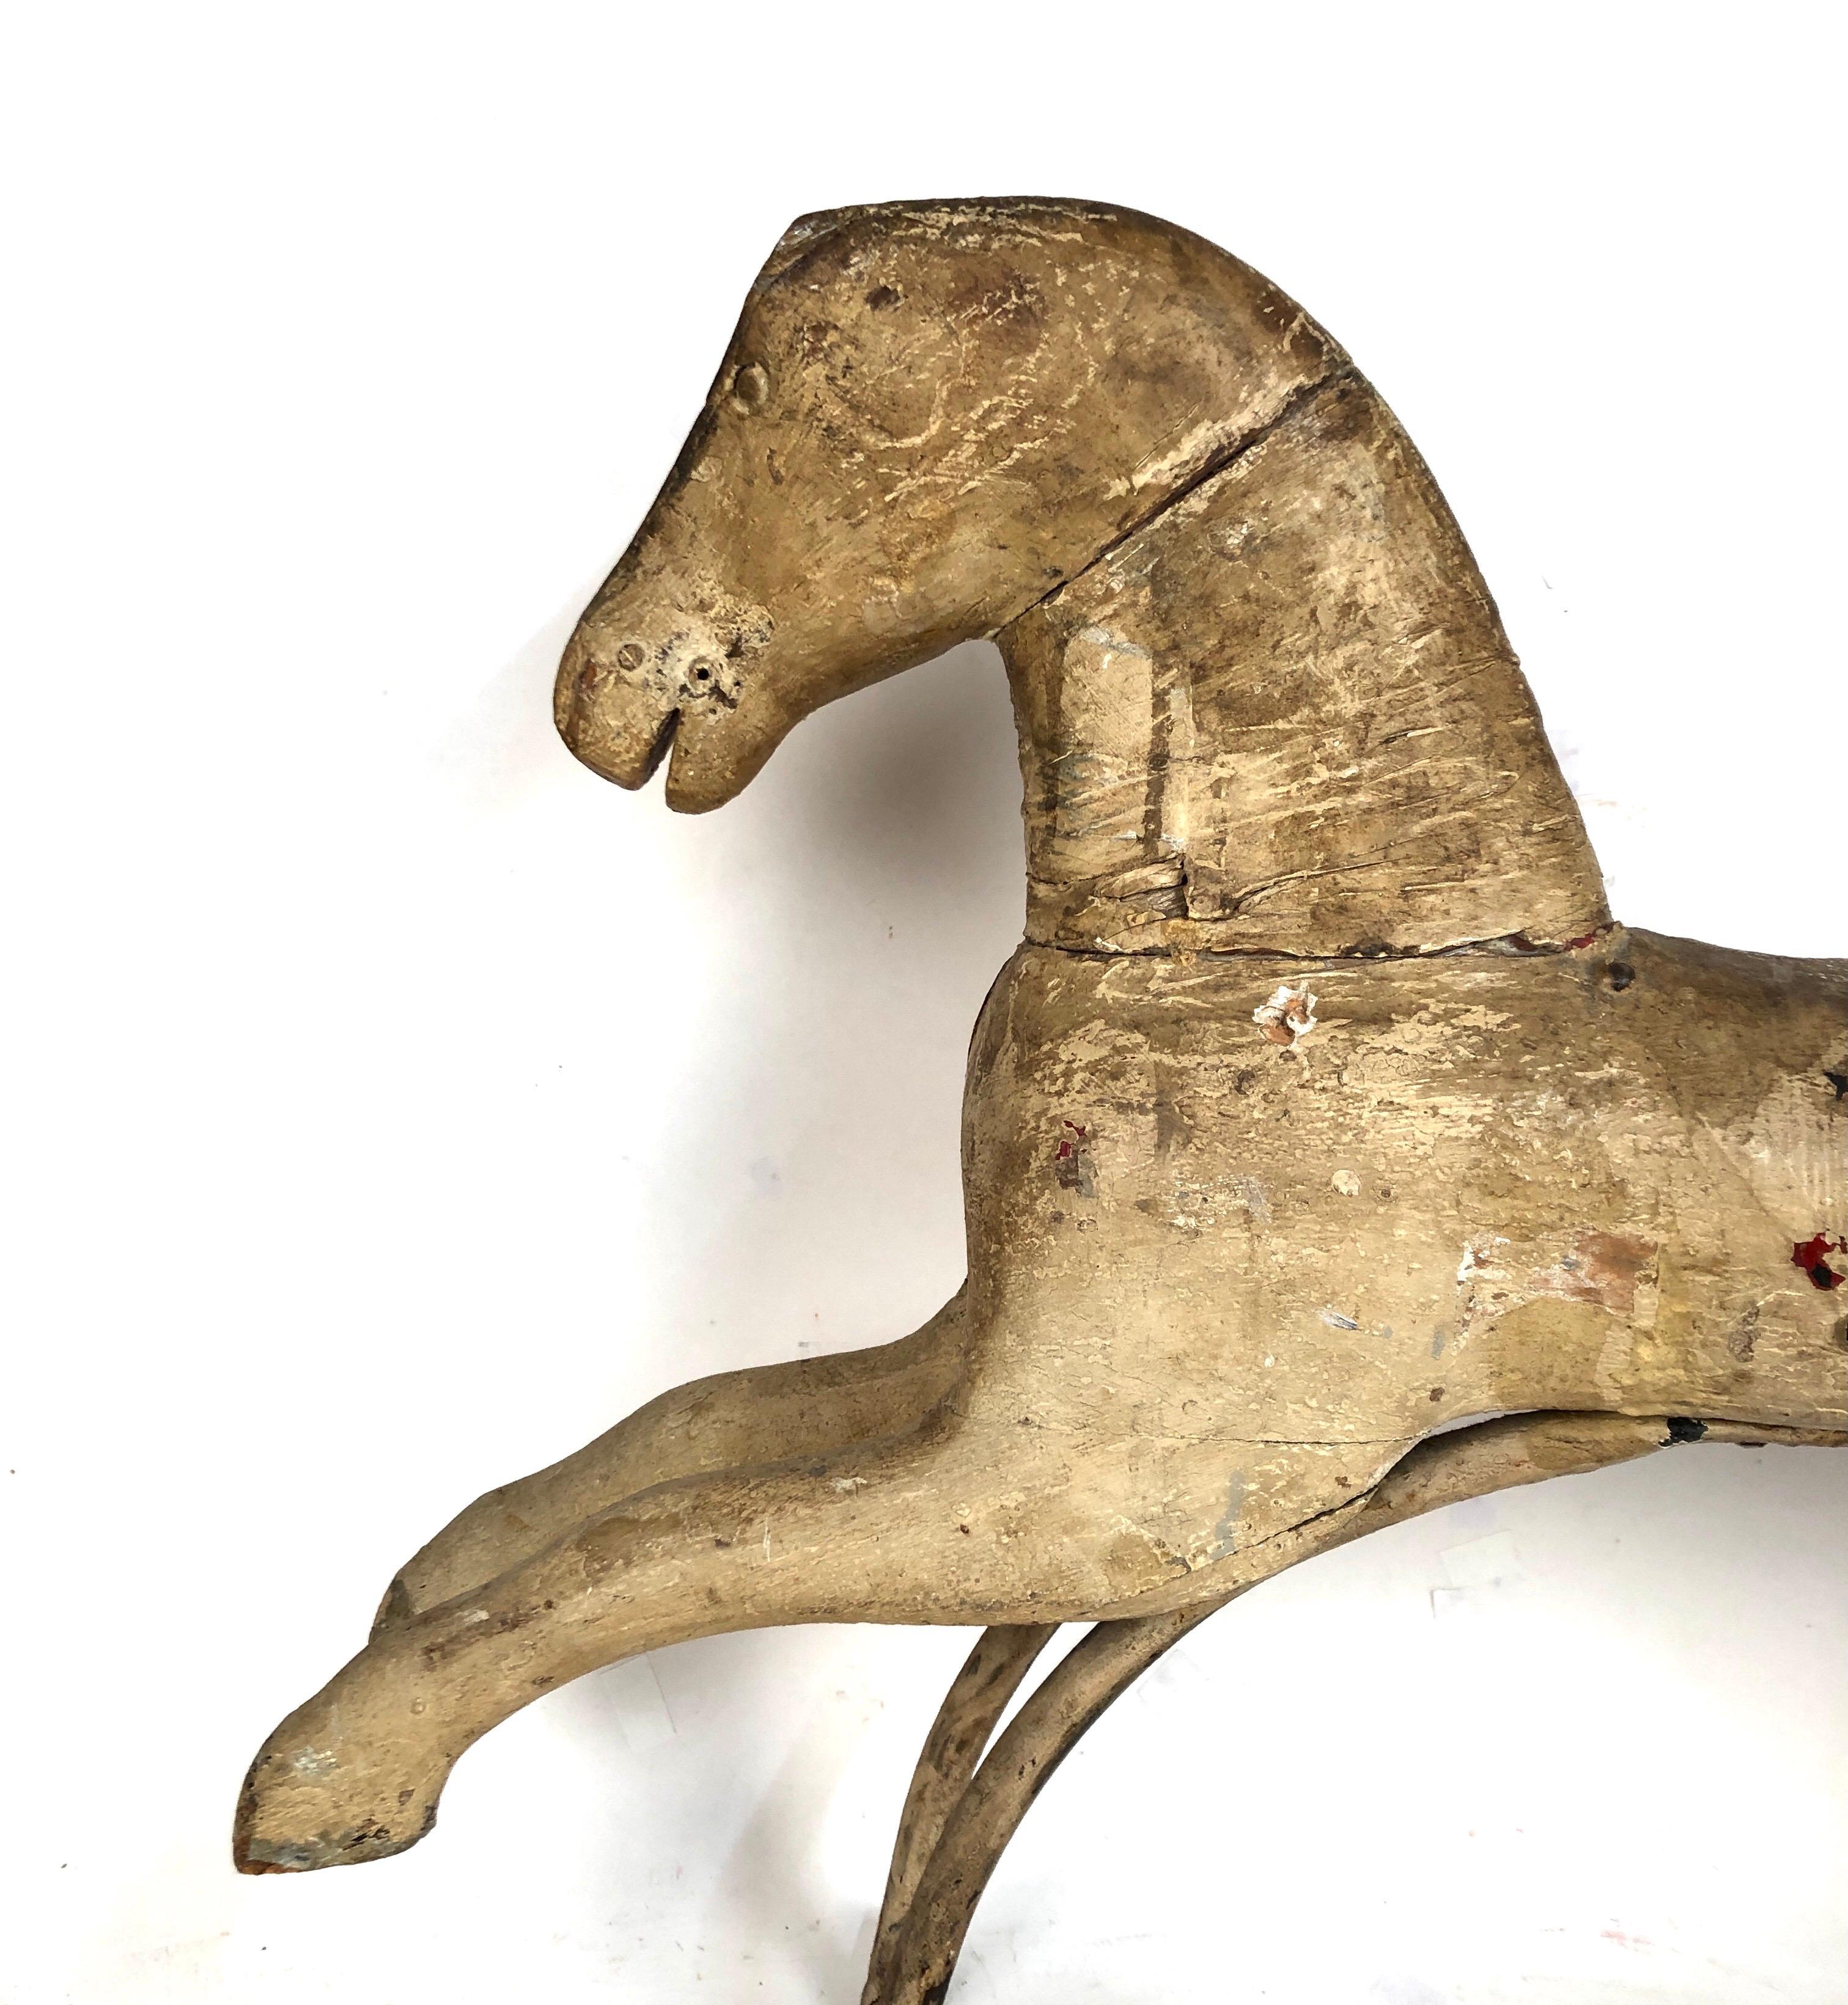 A very nice early antique wood rocking horse with old white paint. Still has the original metal rocking support. Great surface. Dates late 19th century. Great display item.